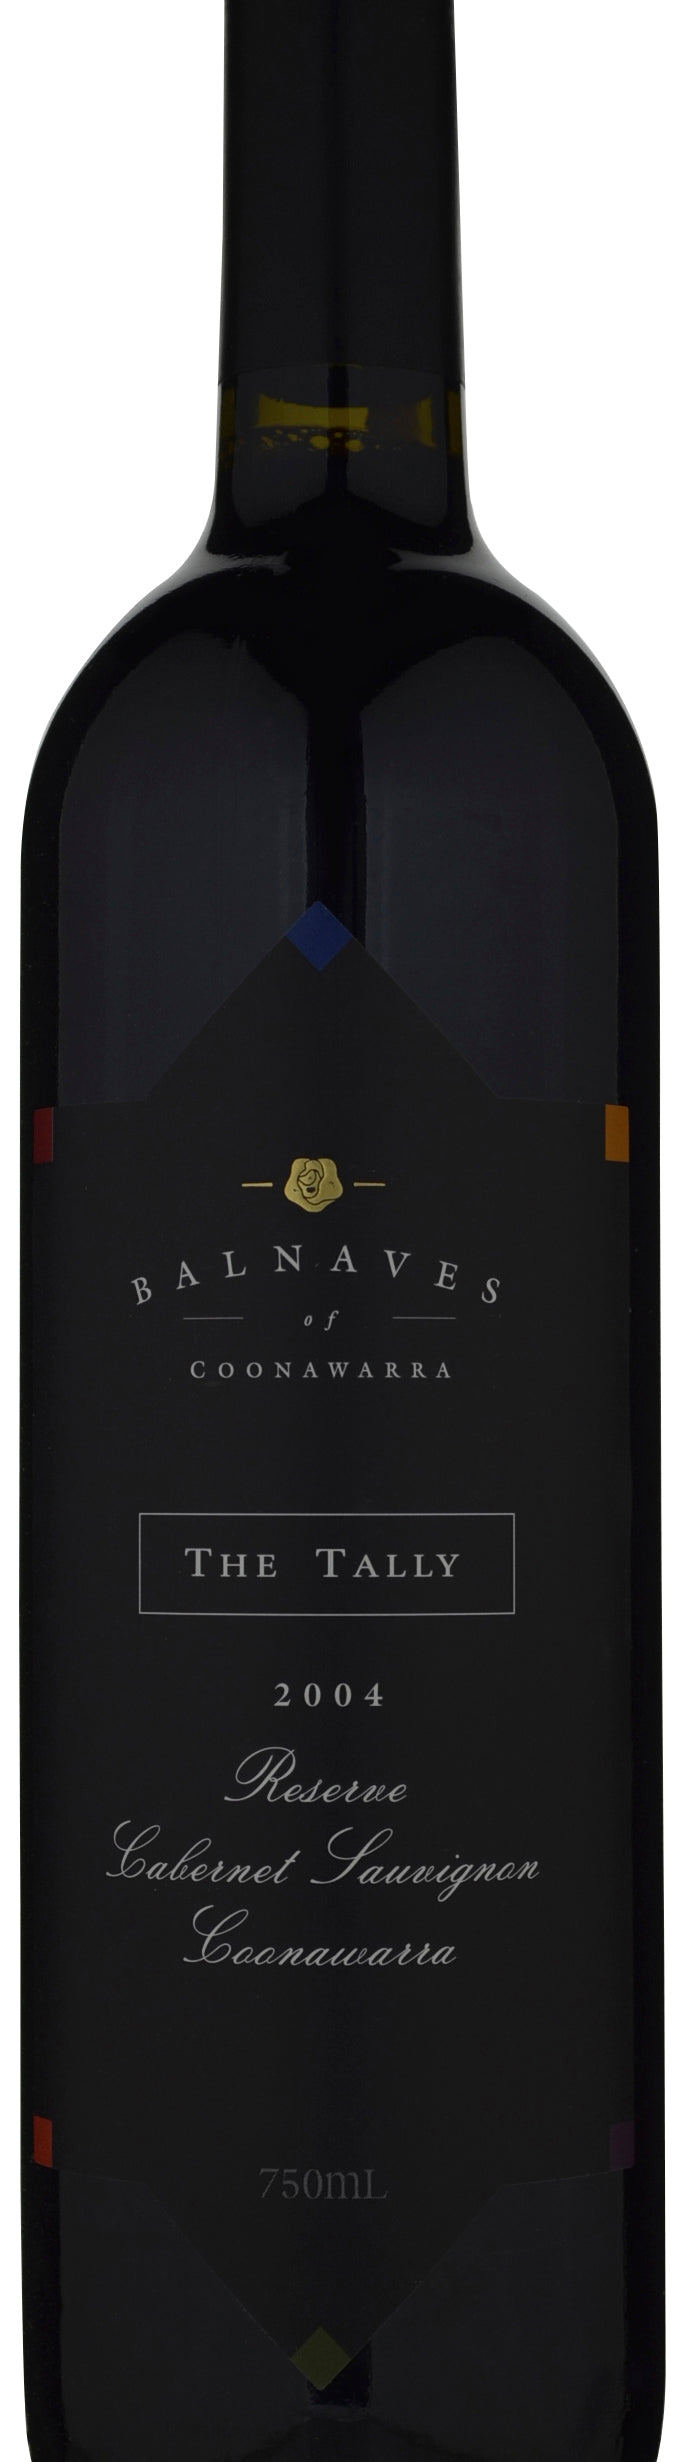 Balnaves of Coonawarra The Tally Reserve Cabernet Sauvignon 2004